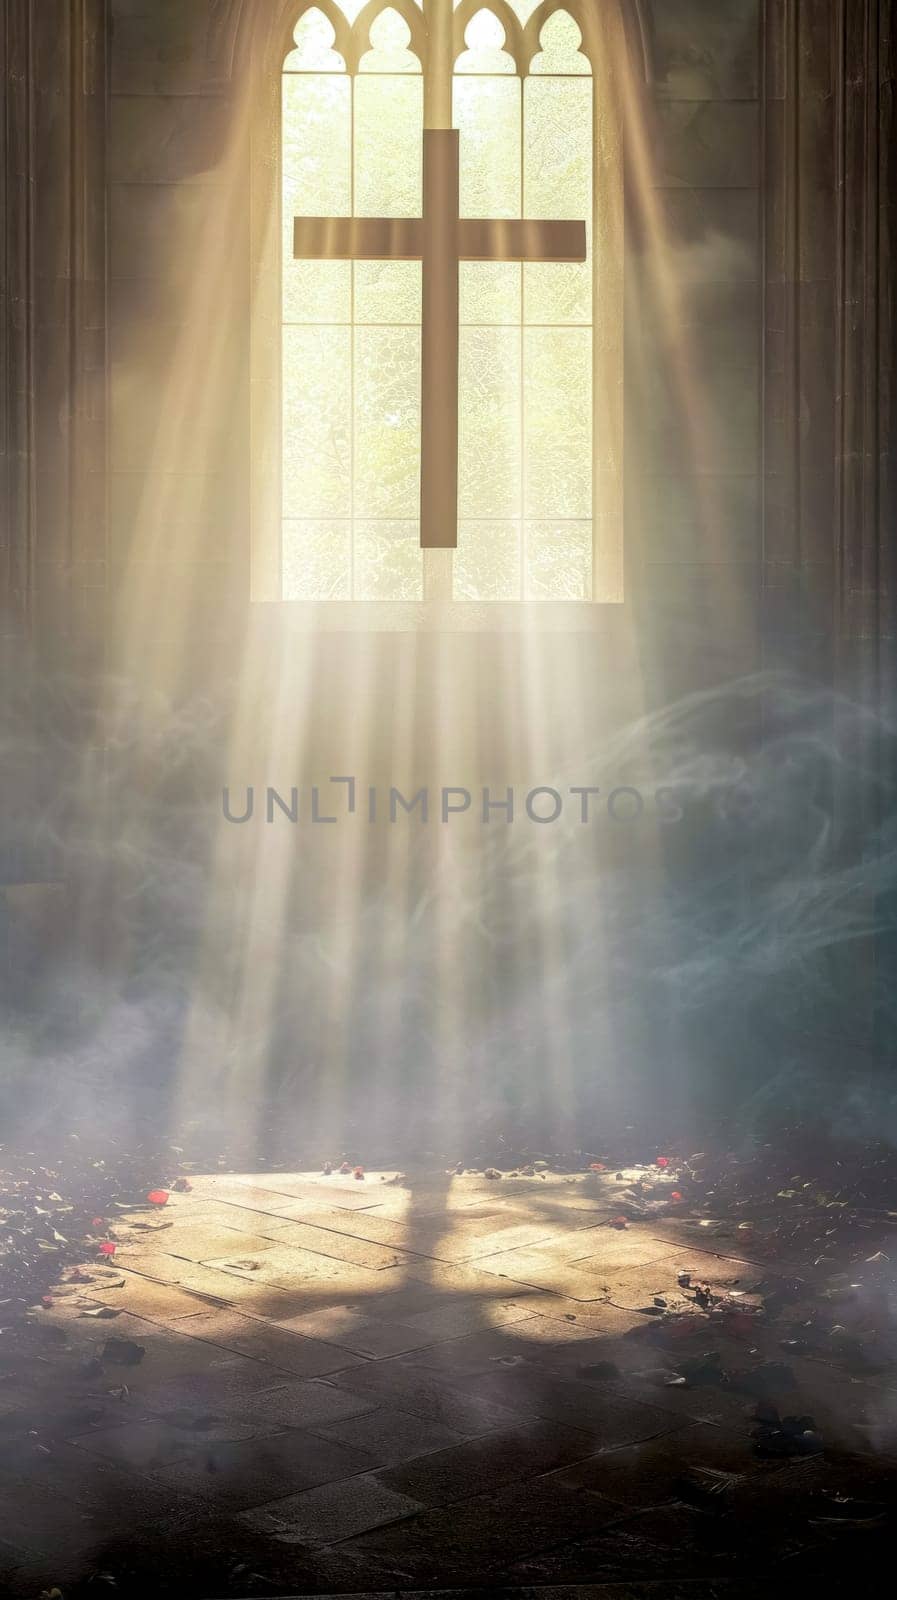 A Christian cross in a church interior with sunlight streaming through a stained-glass window, casting a shadow on the floor. light illuminates dust particles and creates an atmosphere of reverence by Edophoto